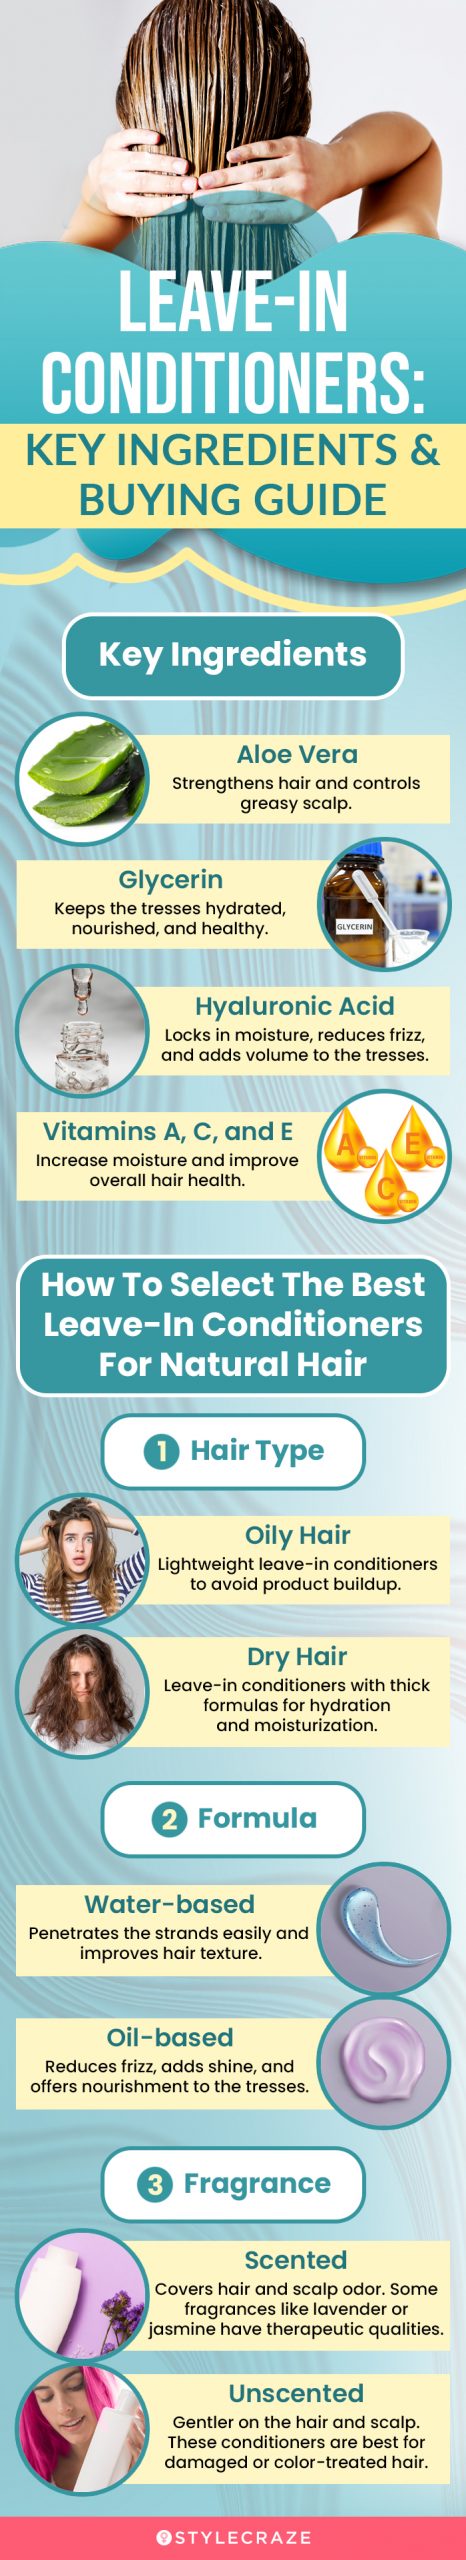 Leave-In Conditioners: Key Ingredients & Buying Guide